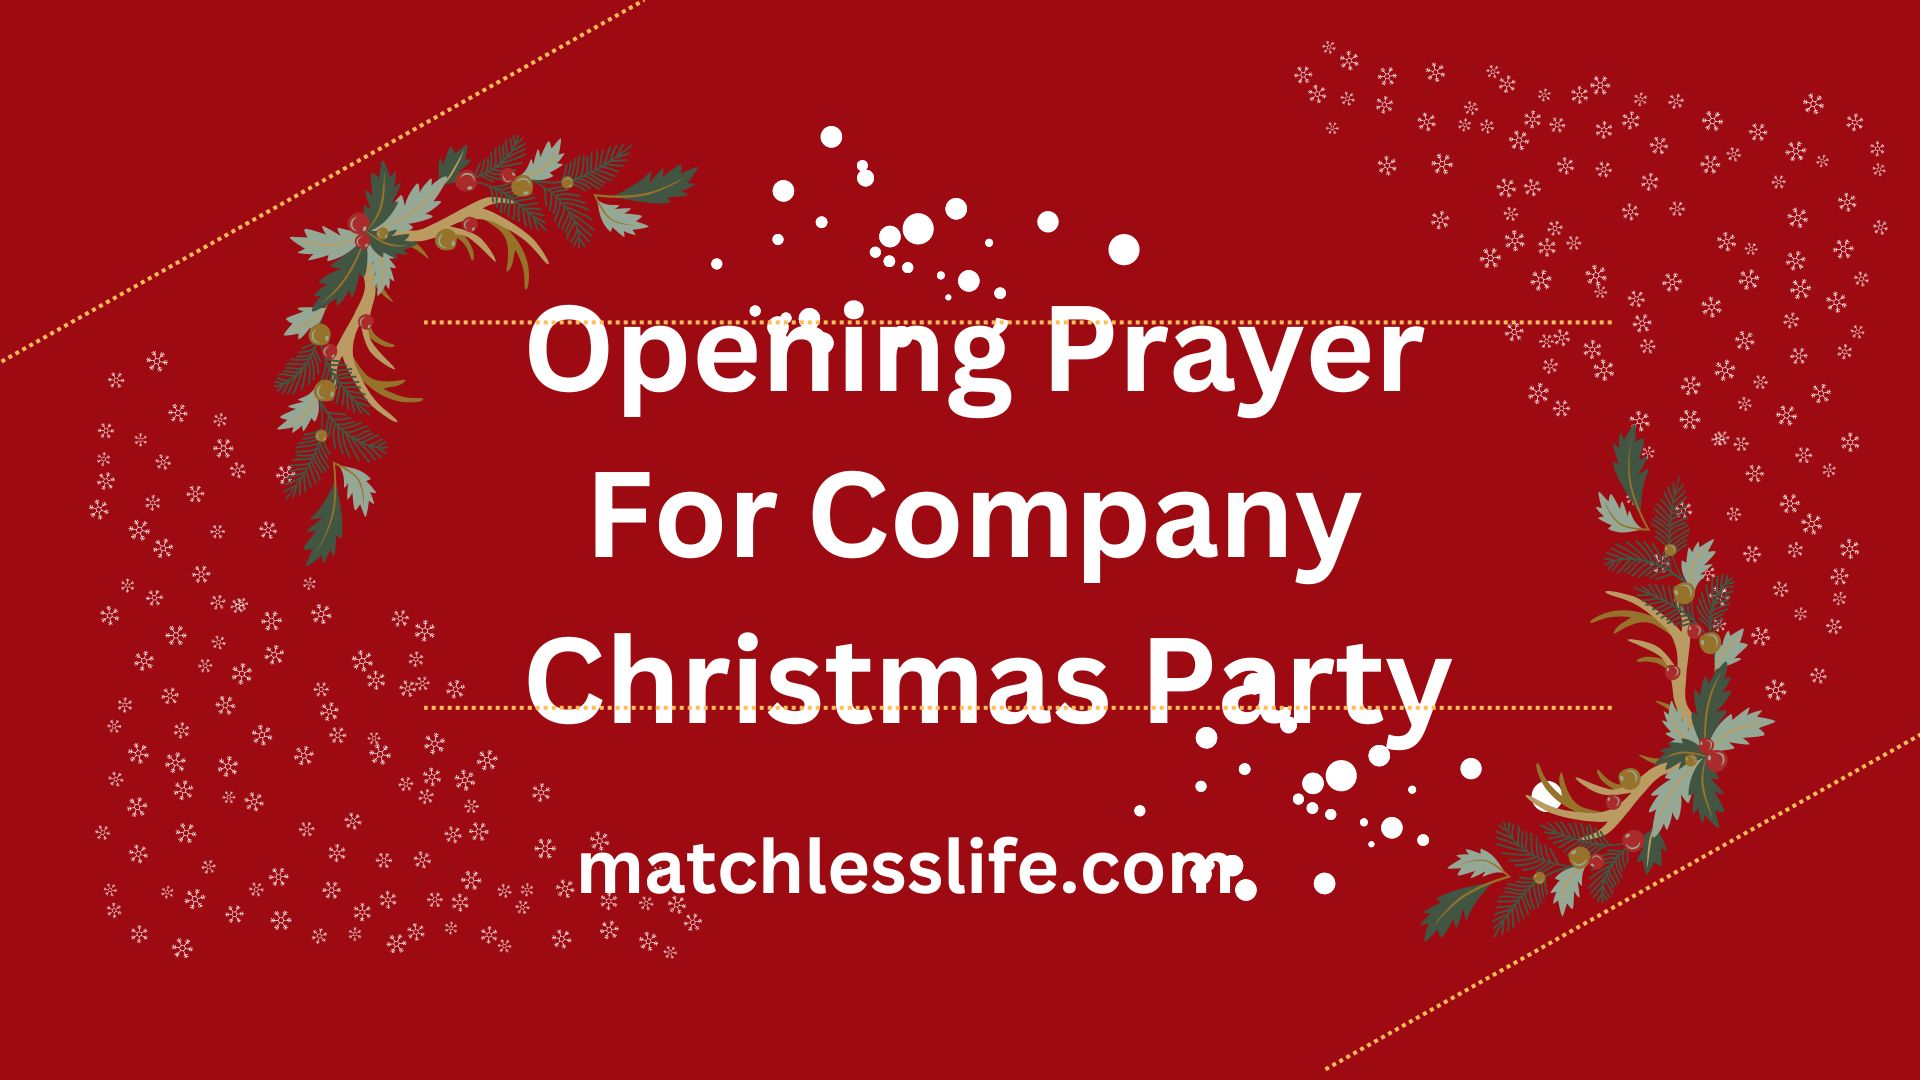 Opening Prayer For Company Christmas Party